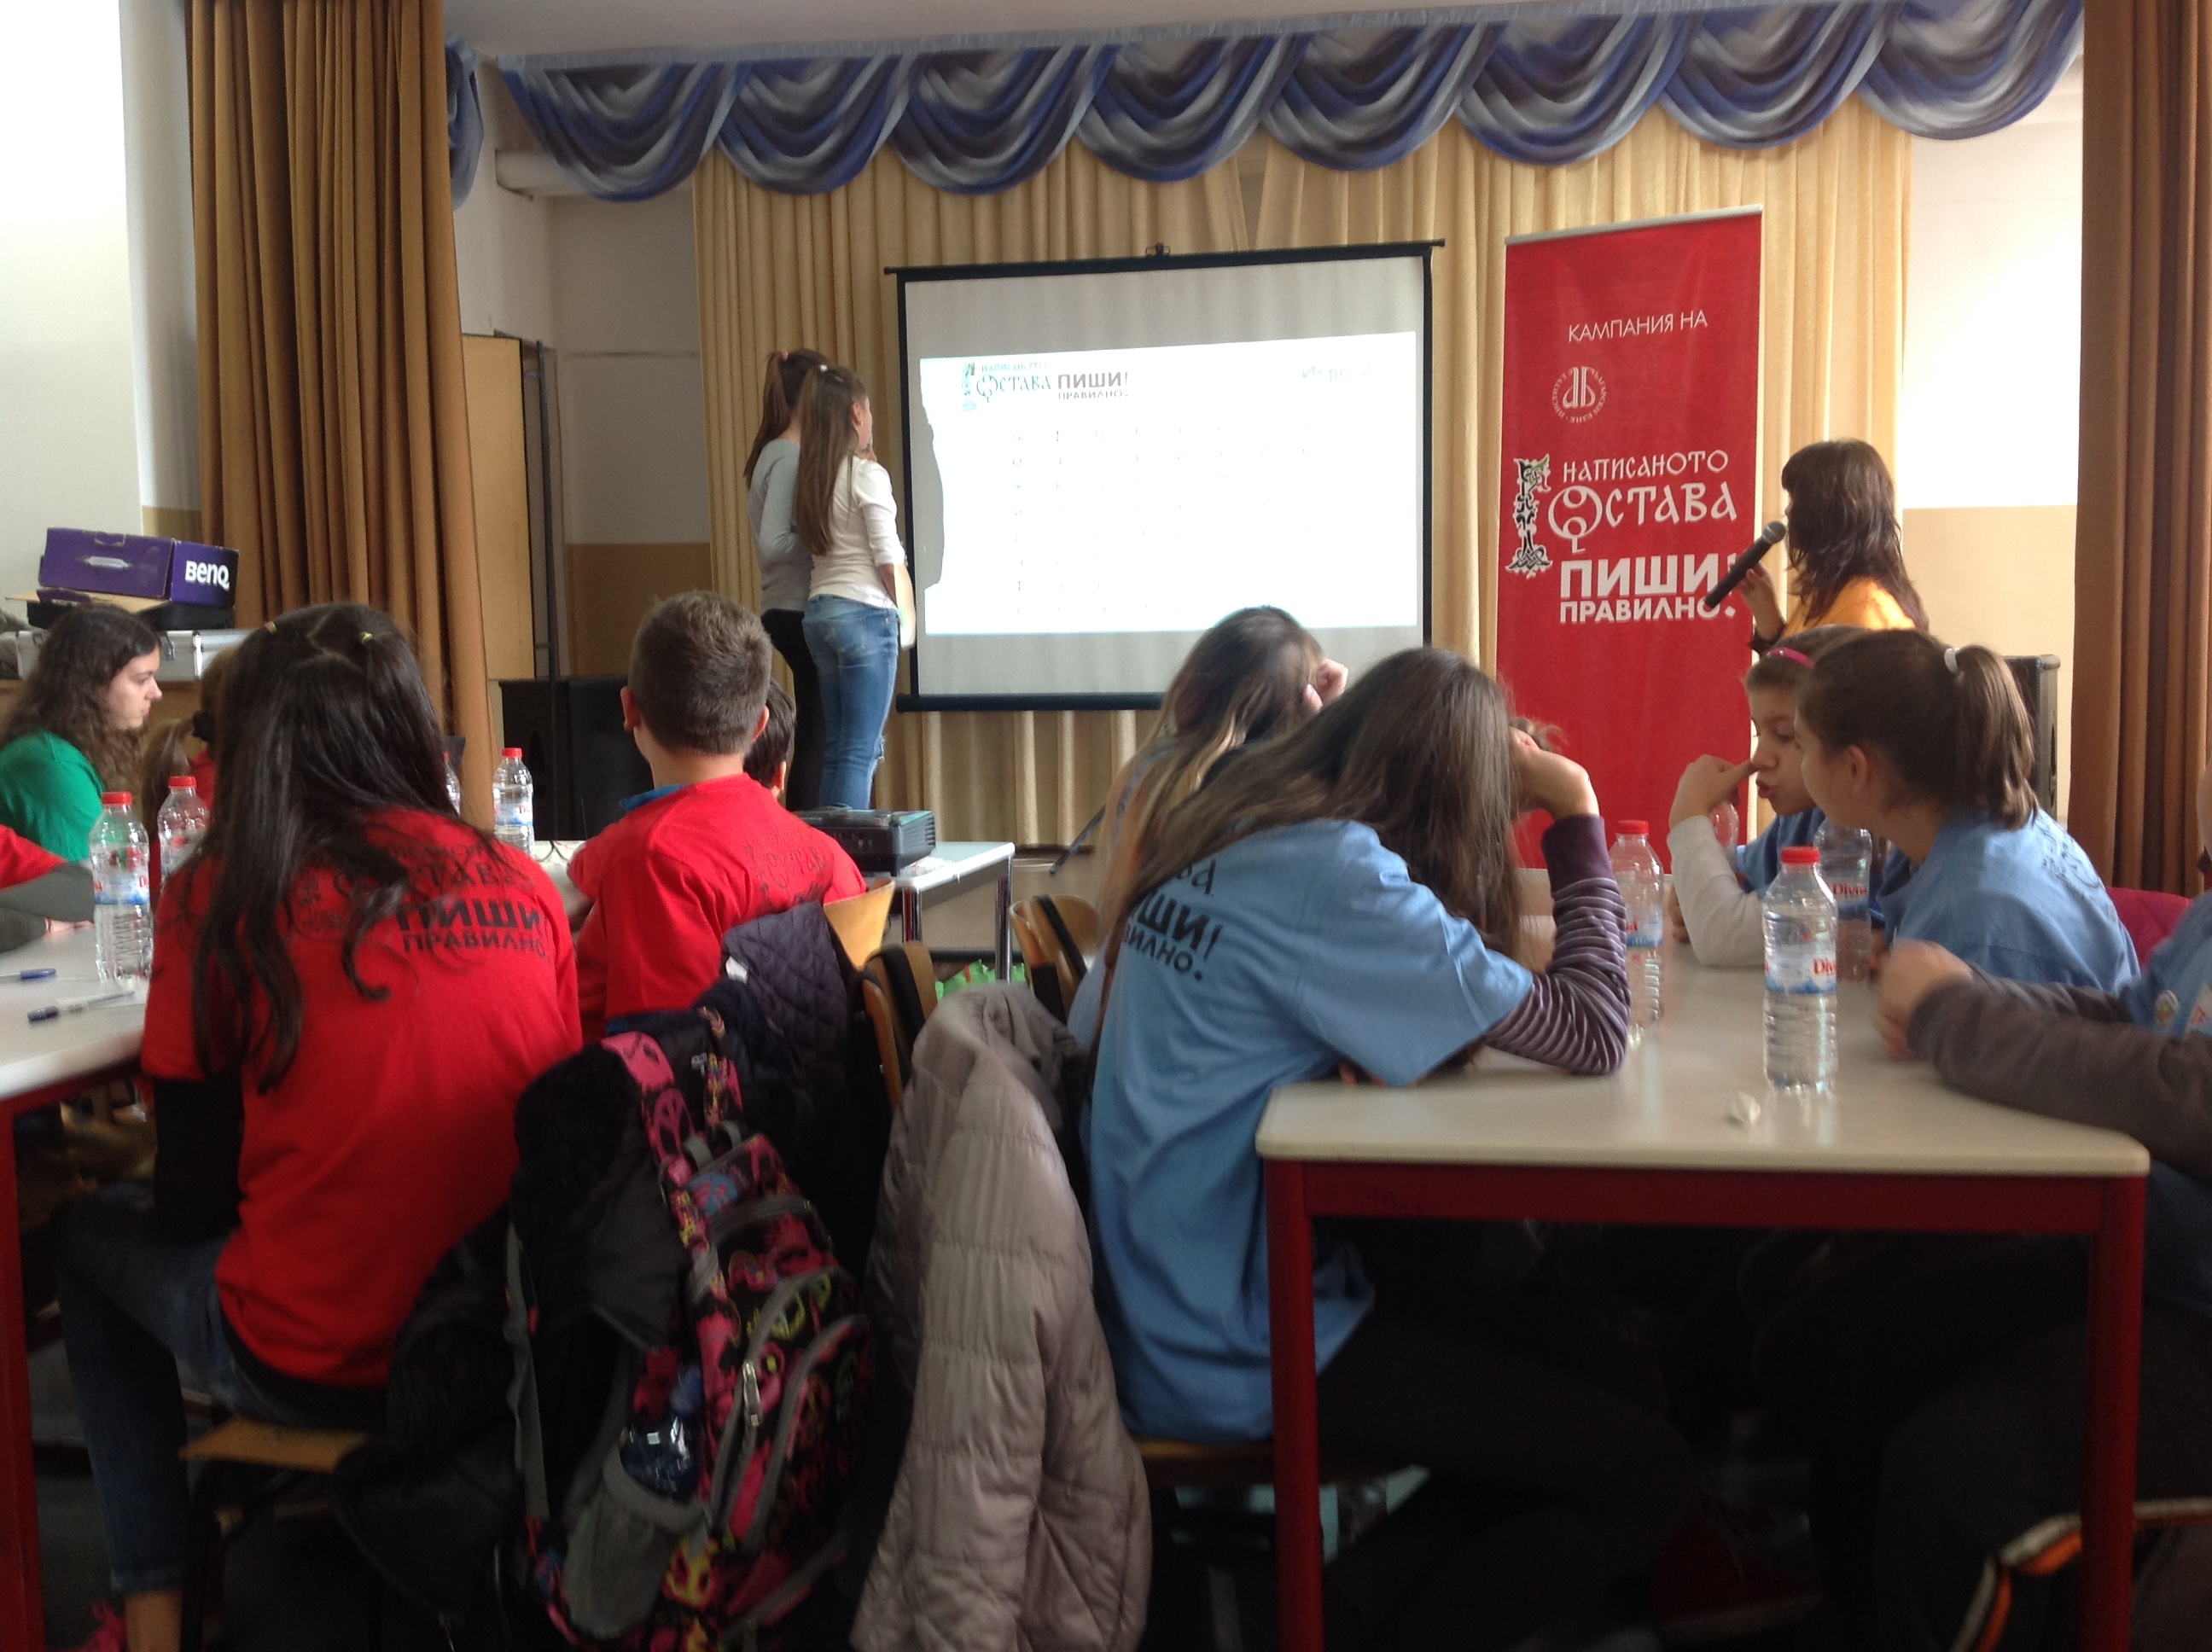 The Institute for Bulgarian Language presented games at the National Reading Week